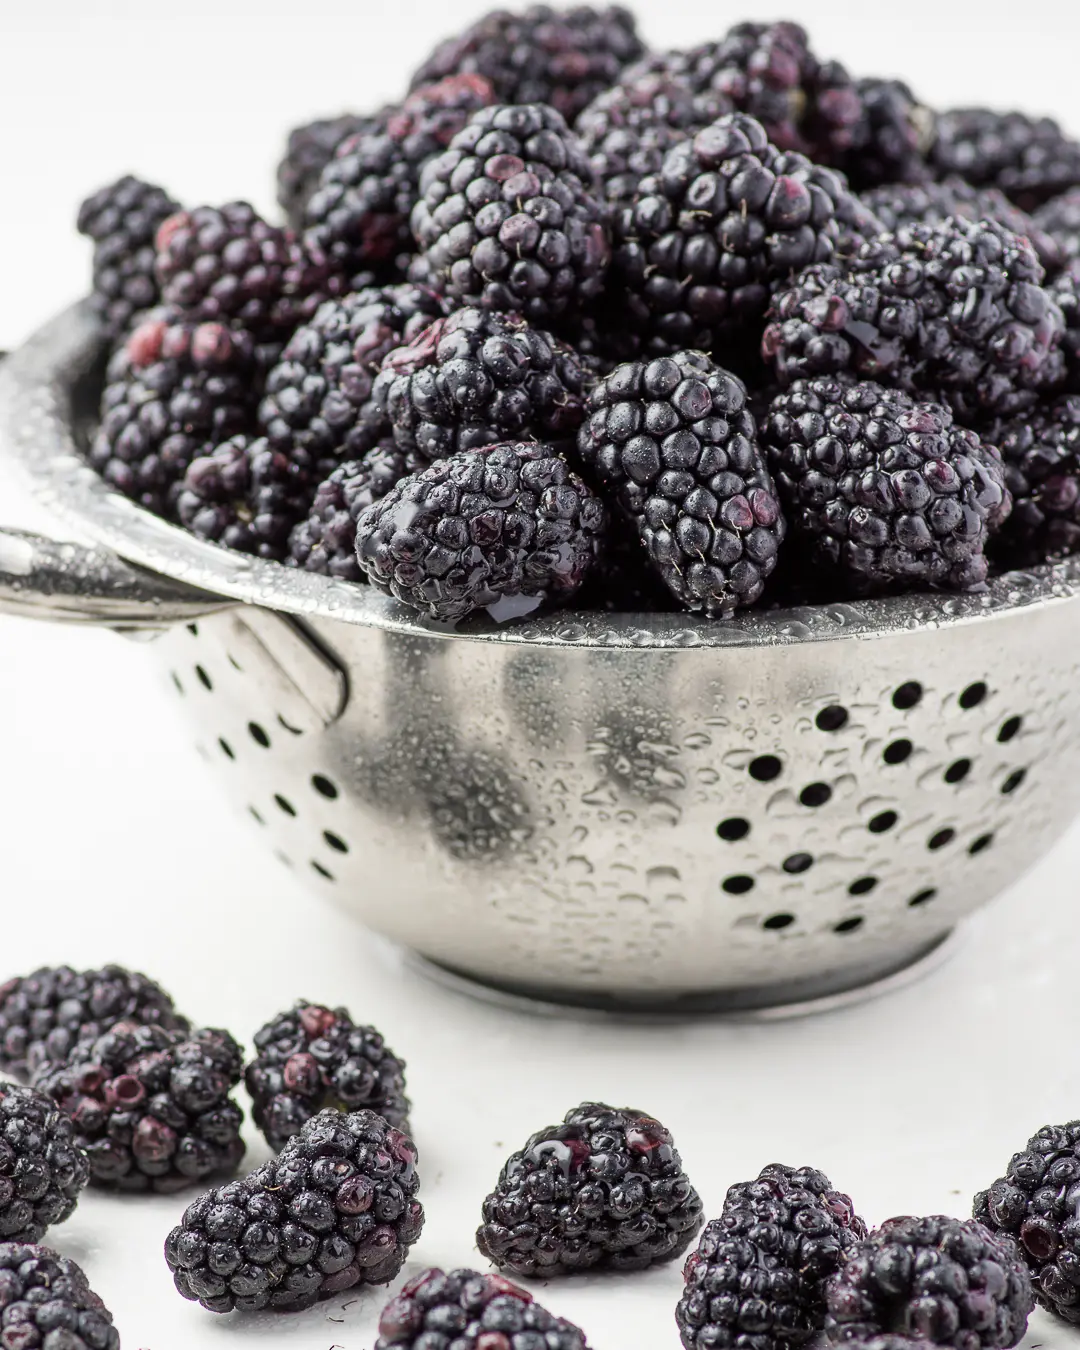 Silver metal colander filled with fresh blackberries on a white background